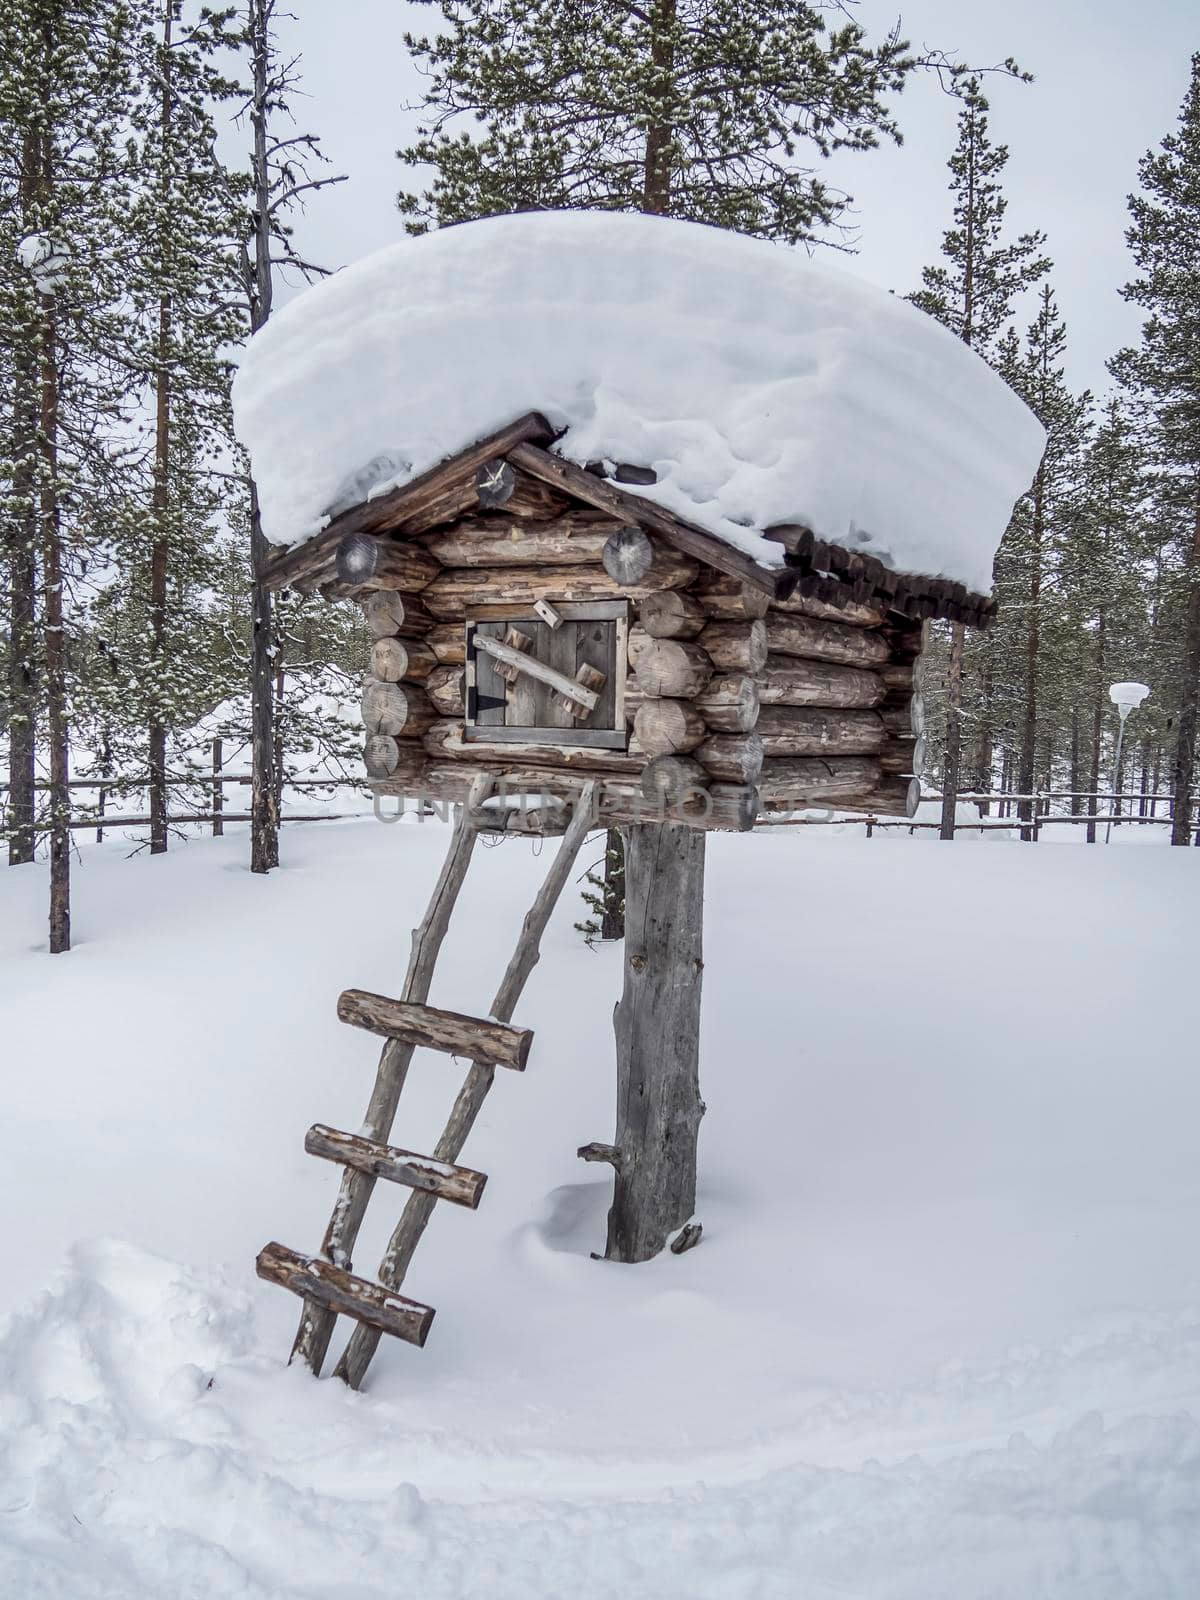 Old wooden hut in winter snowy forest in Finland, Lapland. by Antonelli